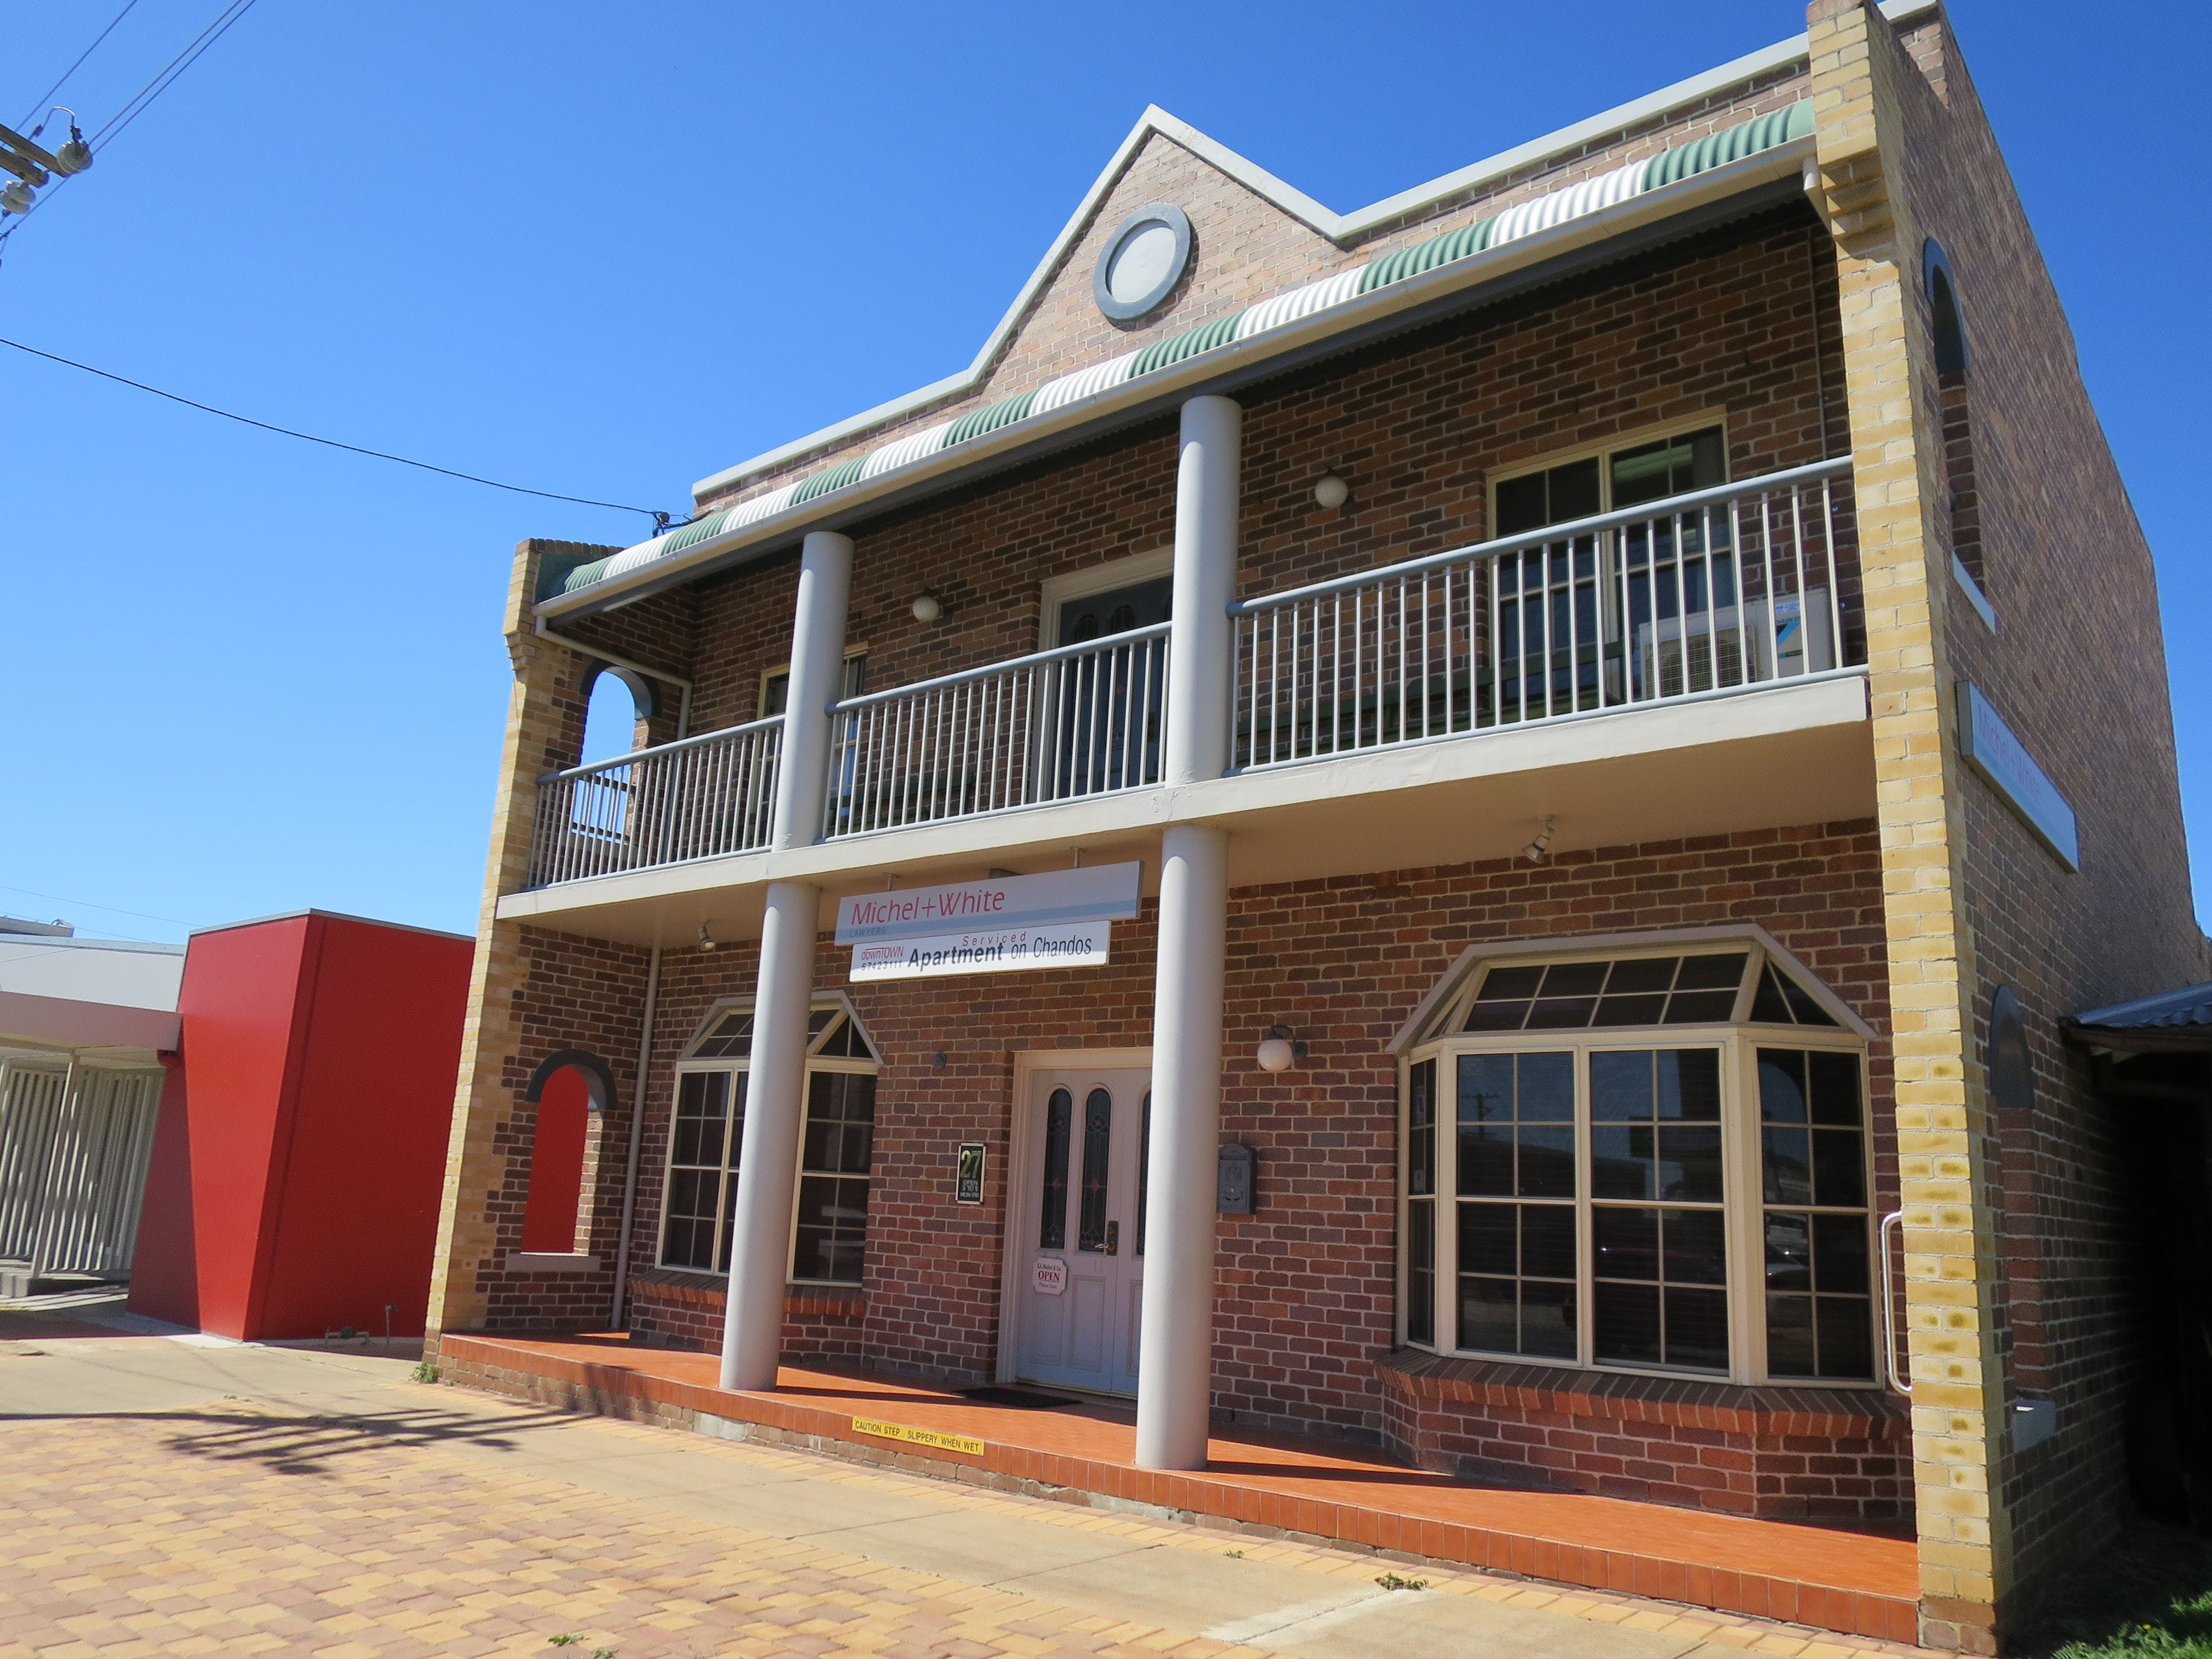 Downtown Apartment on Chandos - Tourism Canberra